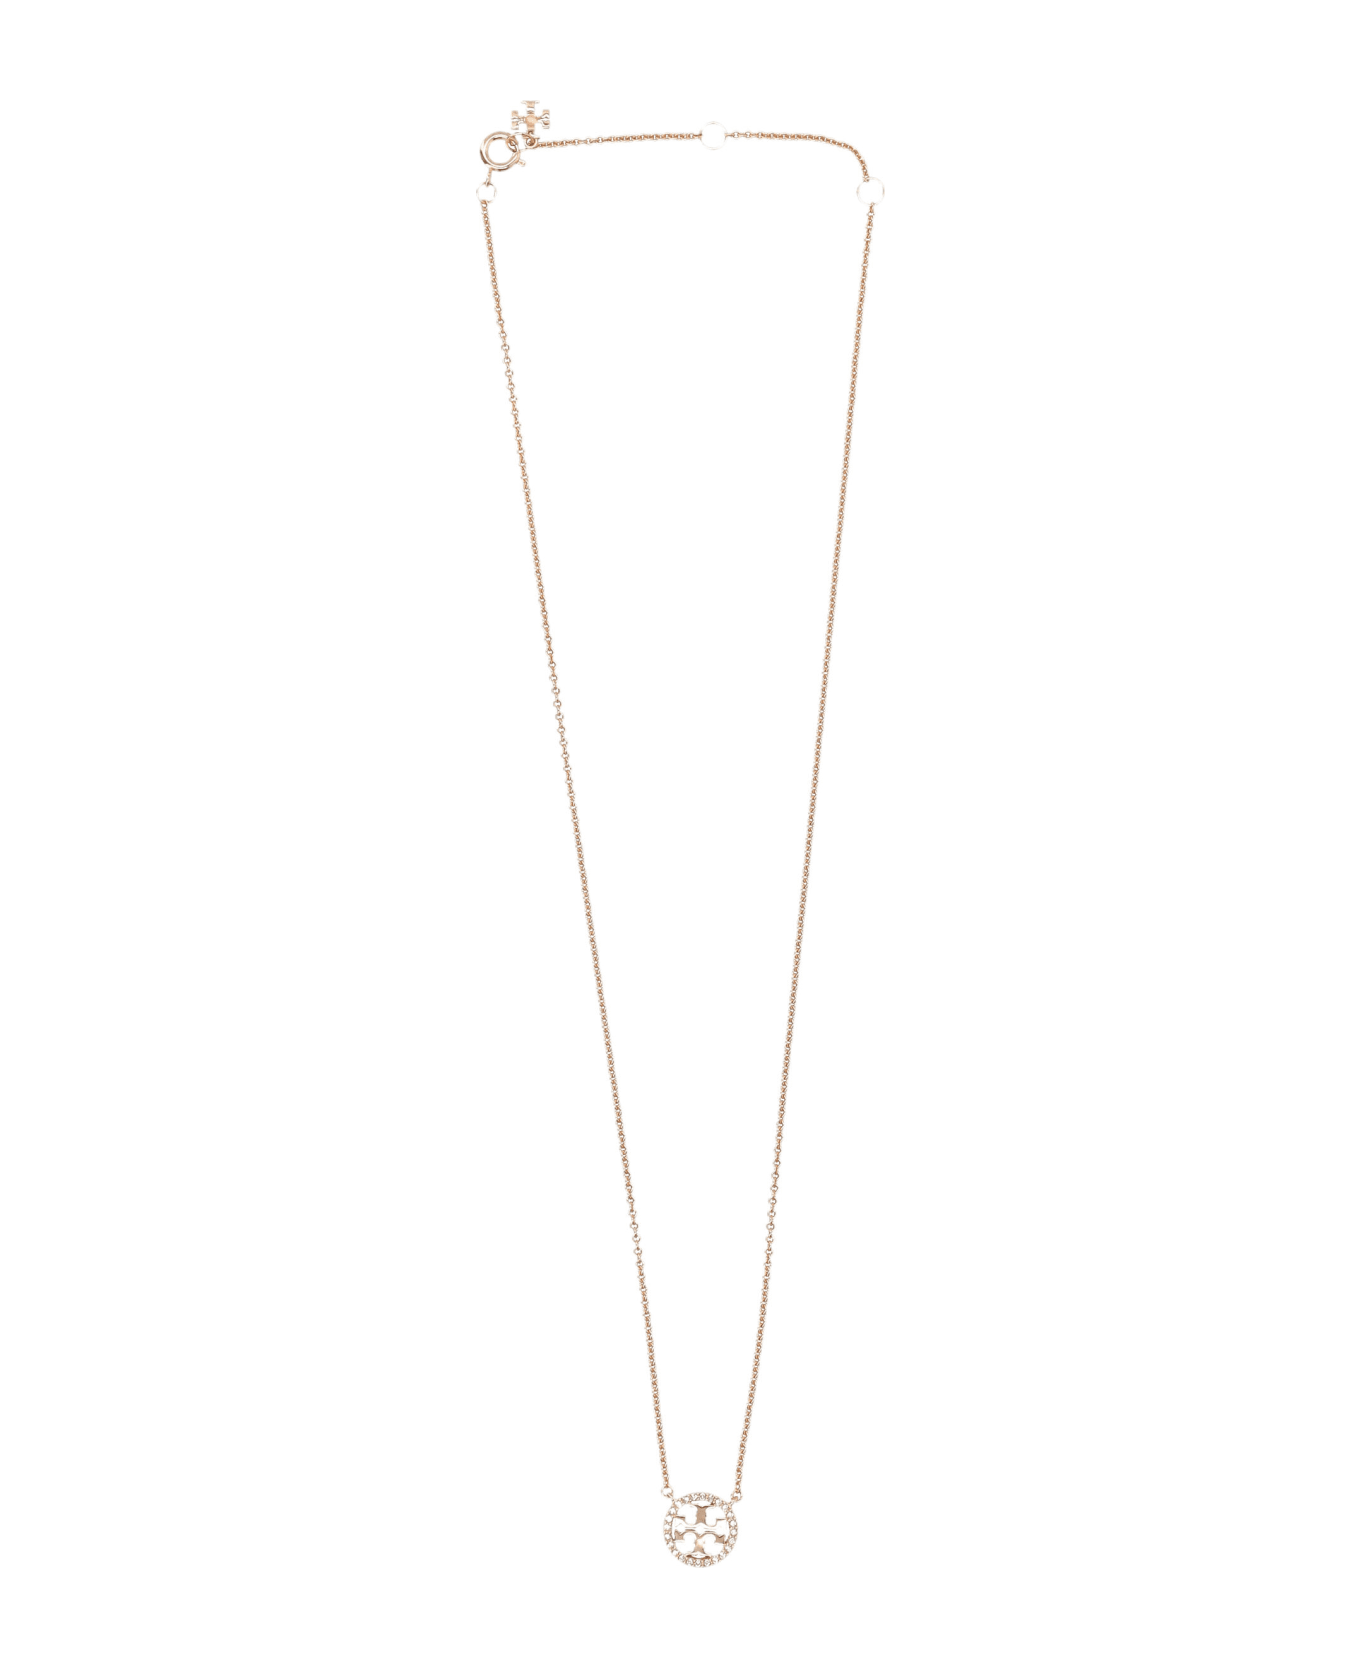 Tory Burch Miller Pave Pendant Necklace - Rose Gold / Crystal ネックレス